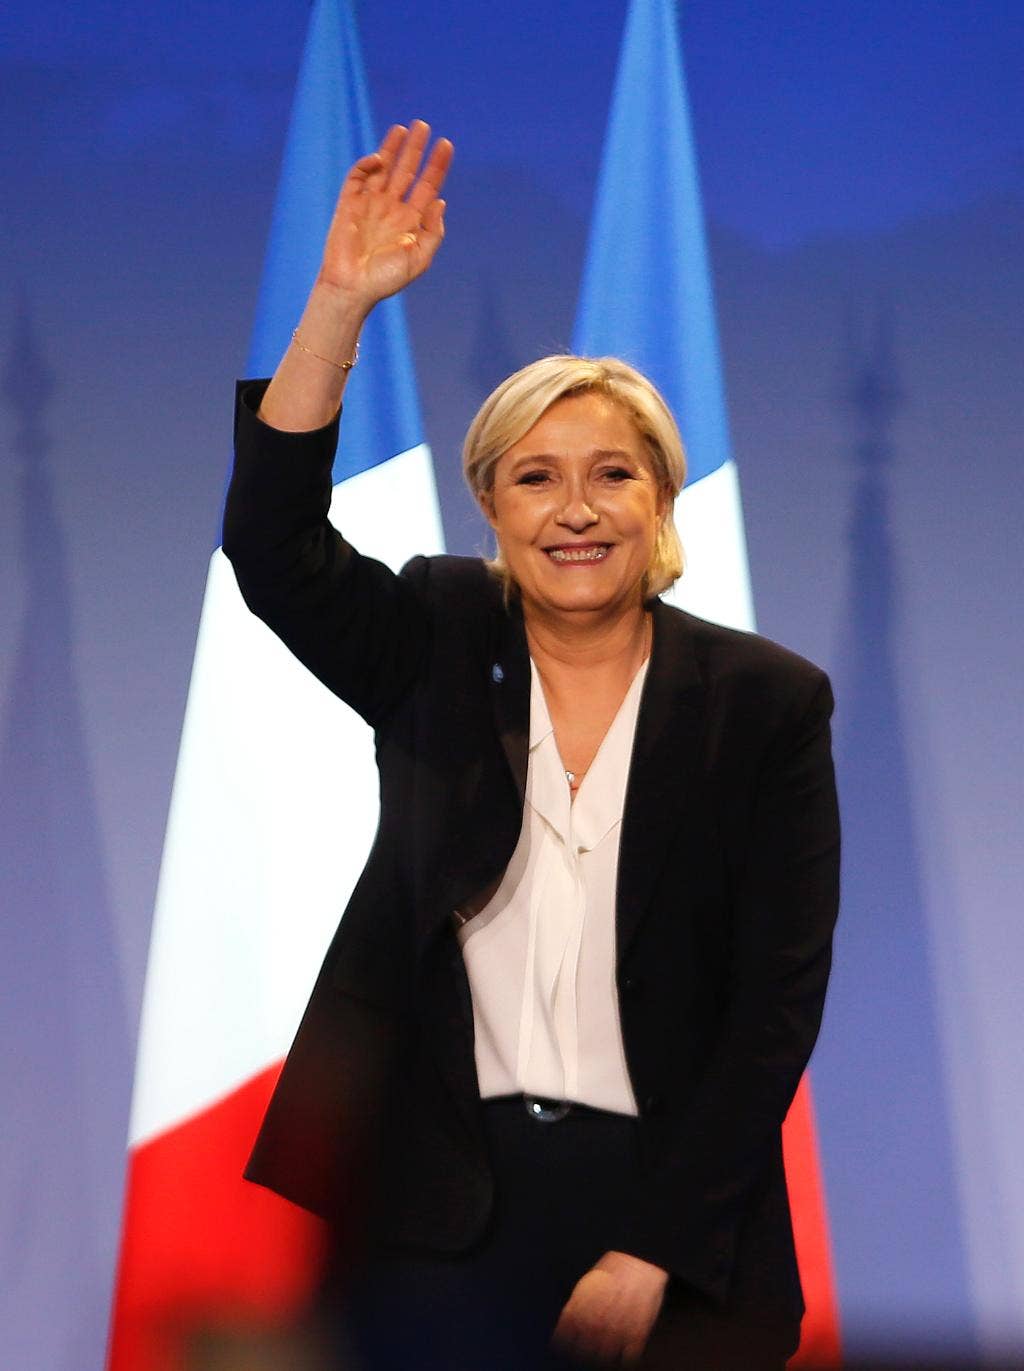 france-s-le-pen-renews-anti-islam-remarks-ahead-of-election